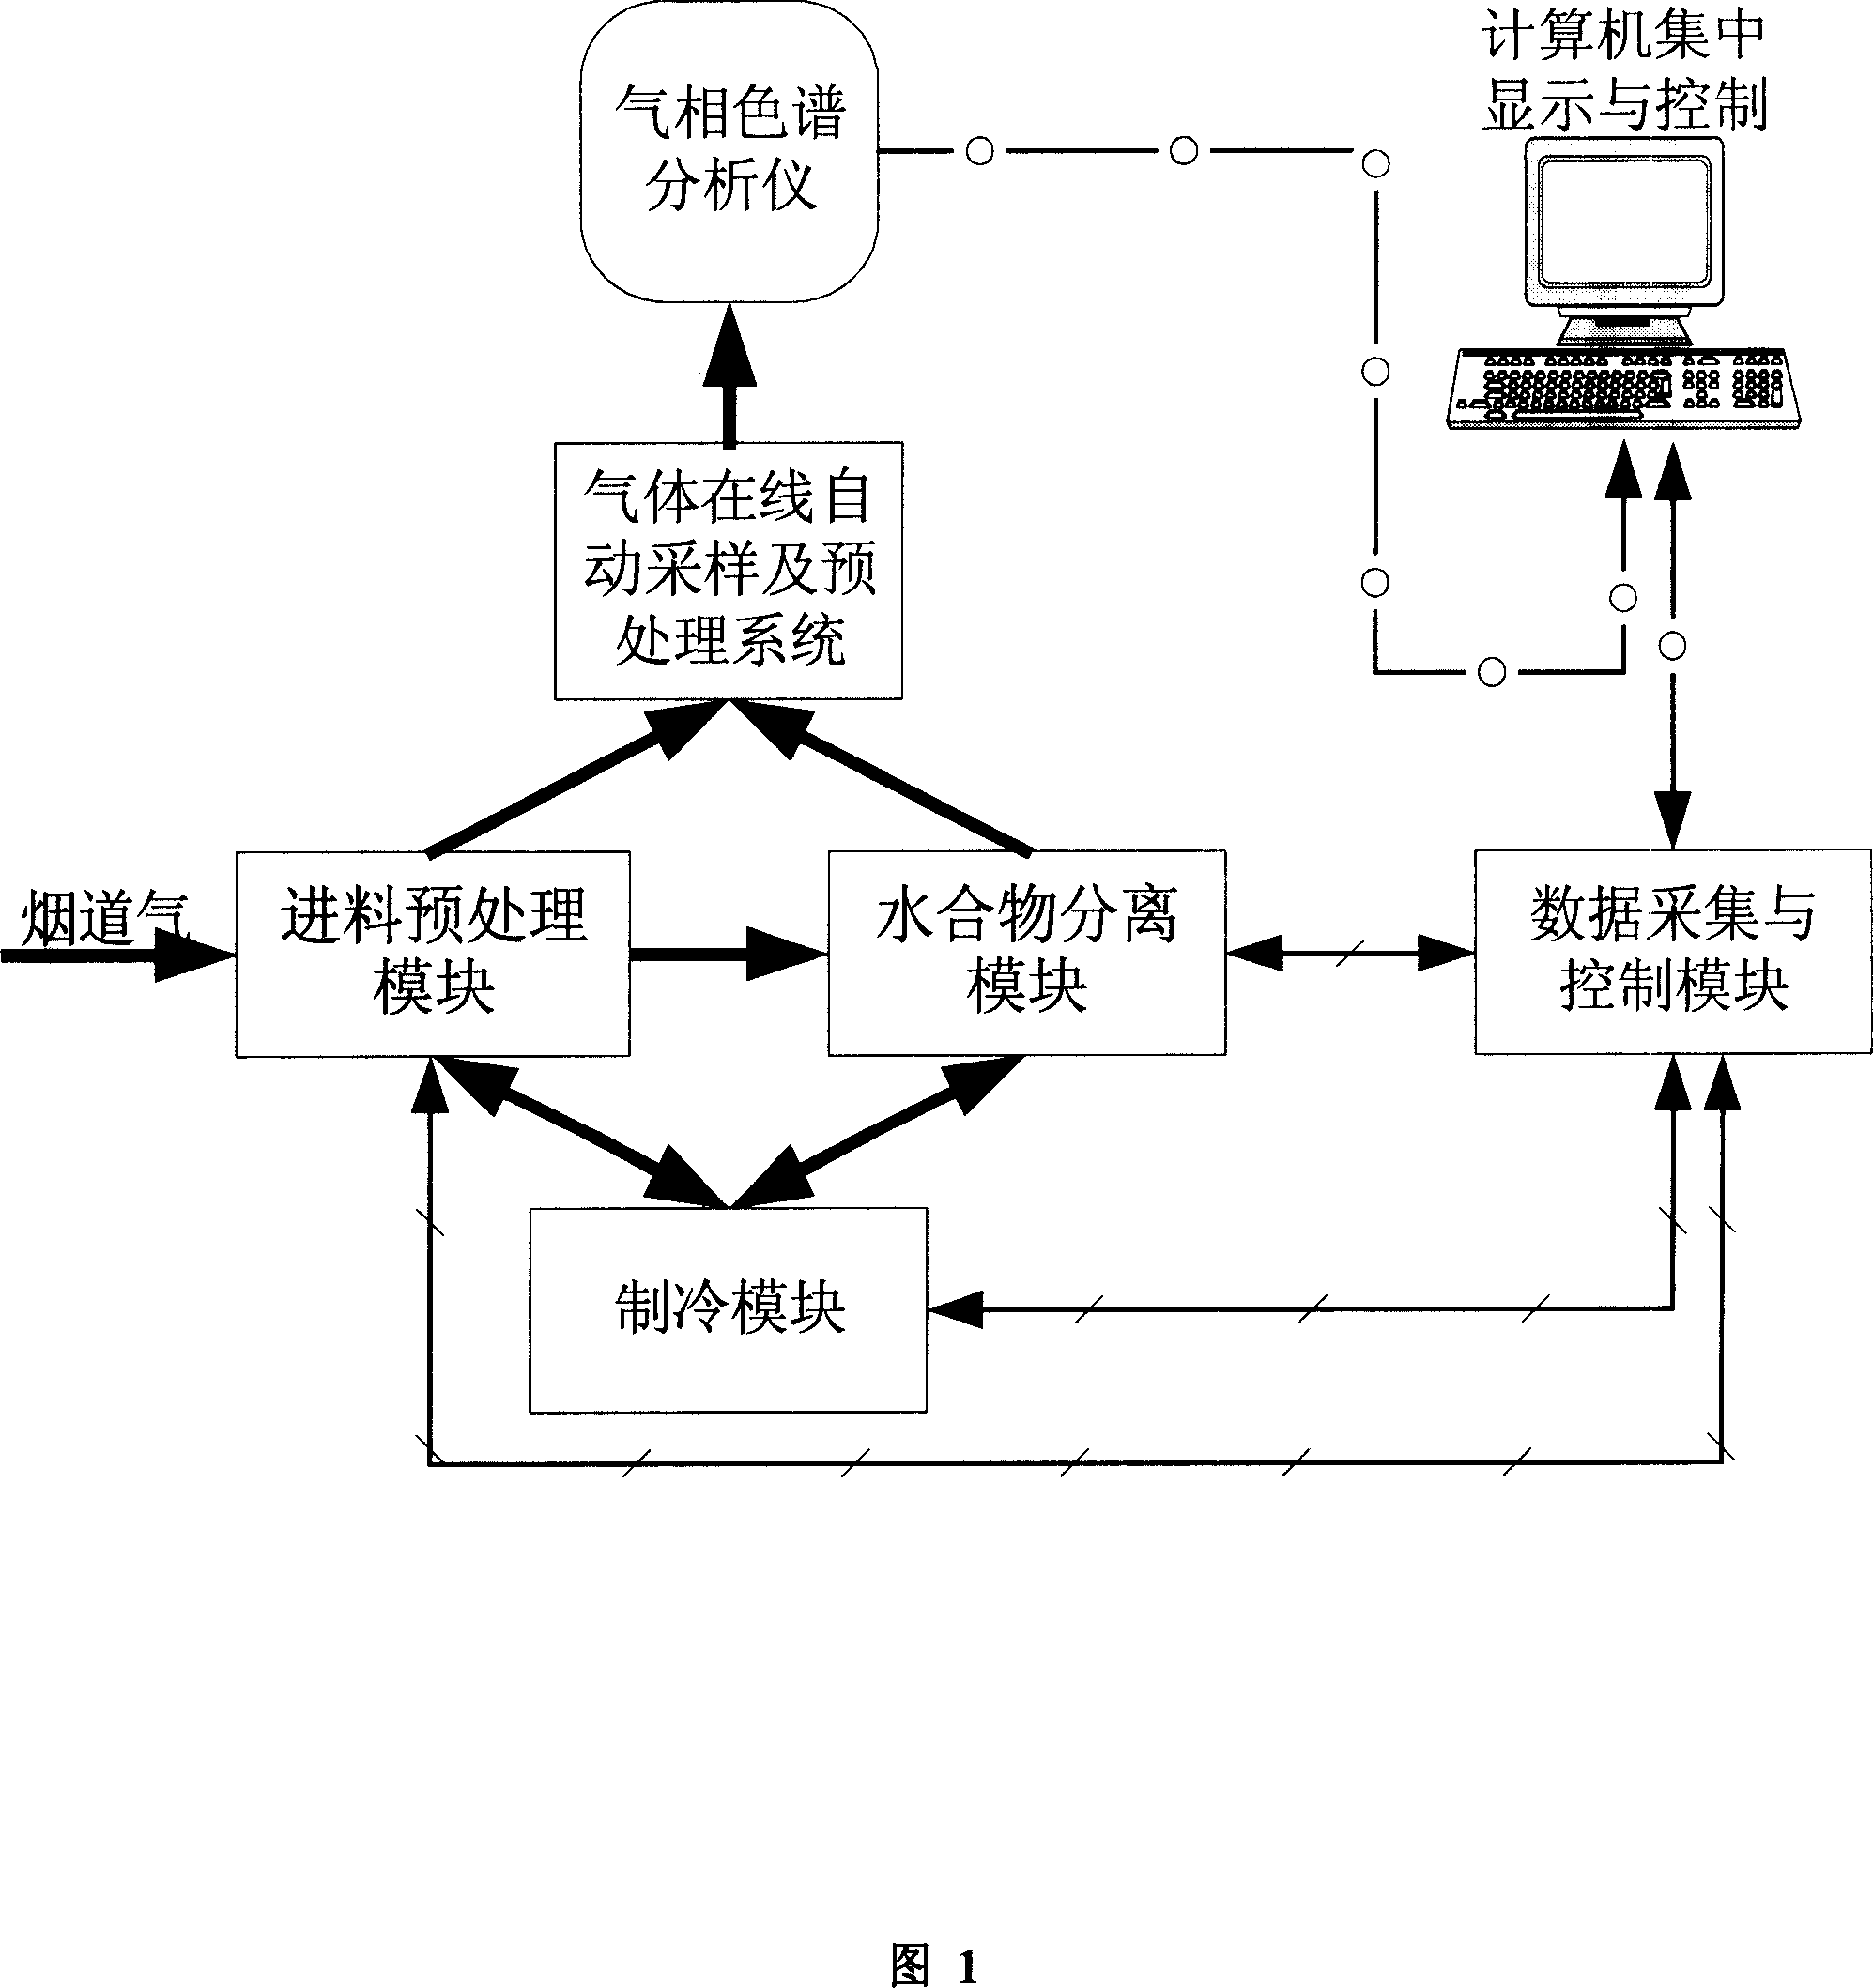 Hydrate process and apparatus for separating gas mixture continuously